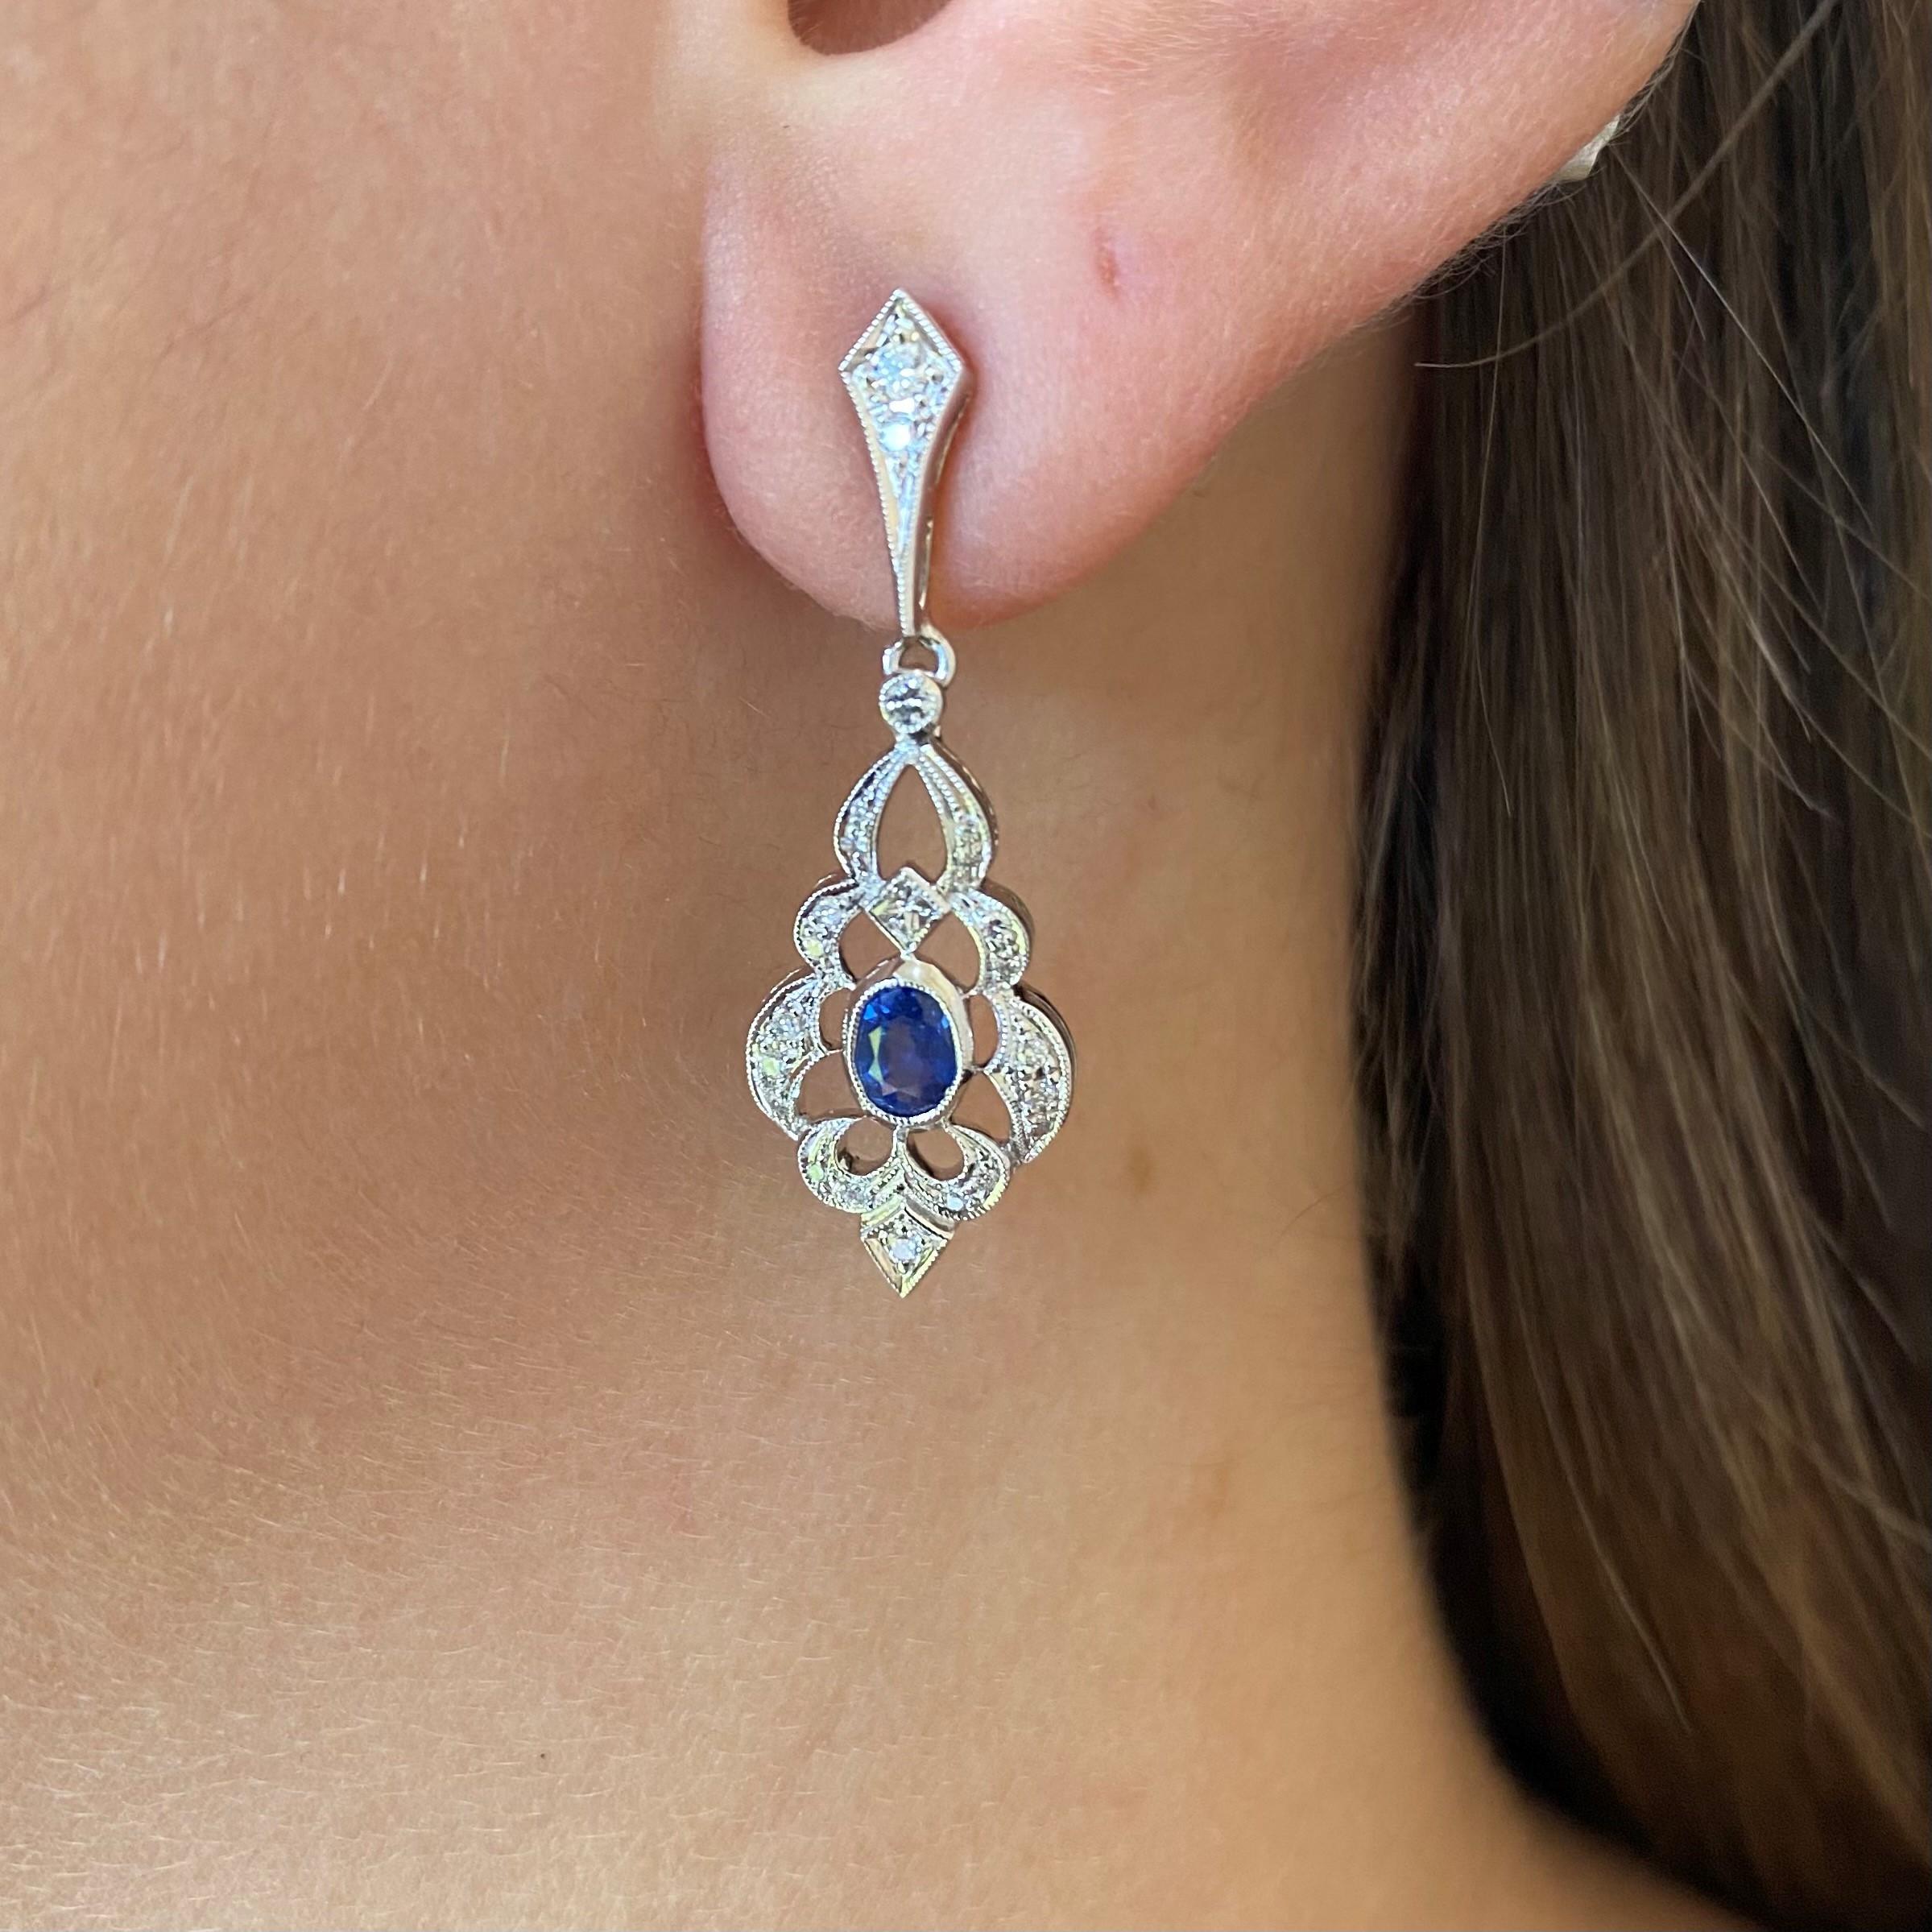 18k white gold vintage inspired drop earrings with two oval sapphires and diamond detail. Post back.


2 oval sapphires 0.66 carat total weight 
46 round brilliant 0.29 carat total weight H-I/VS-SI diamonds